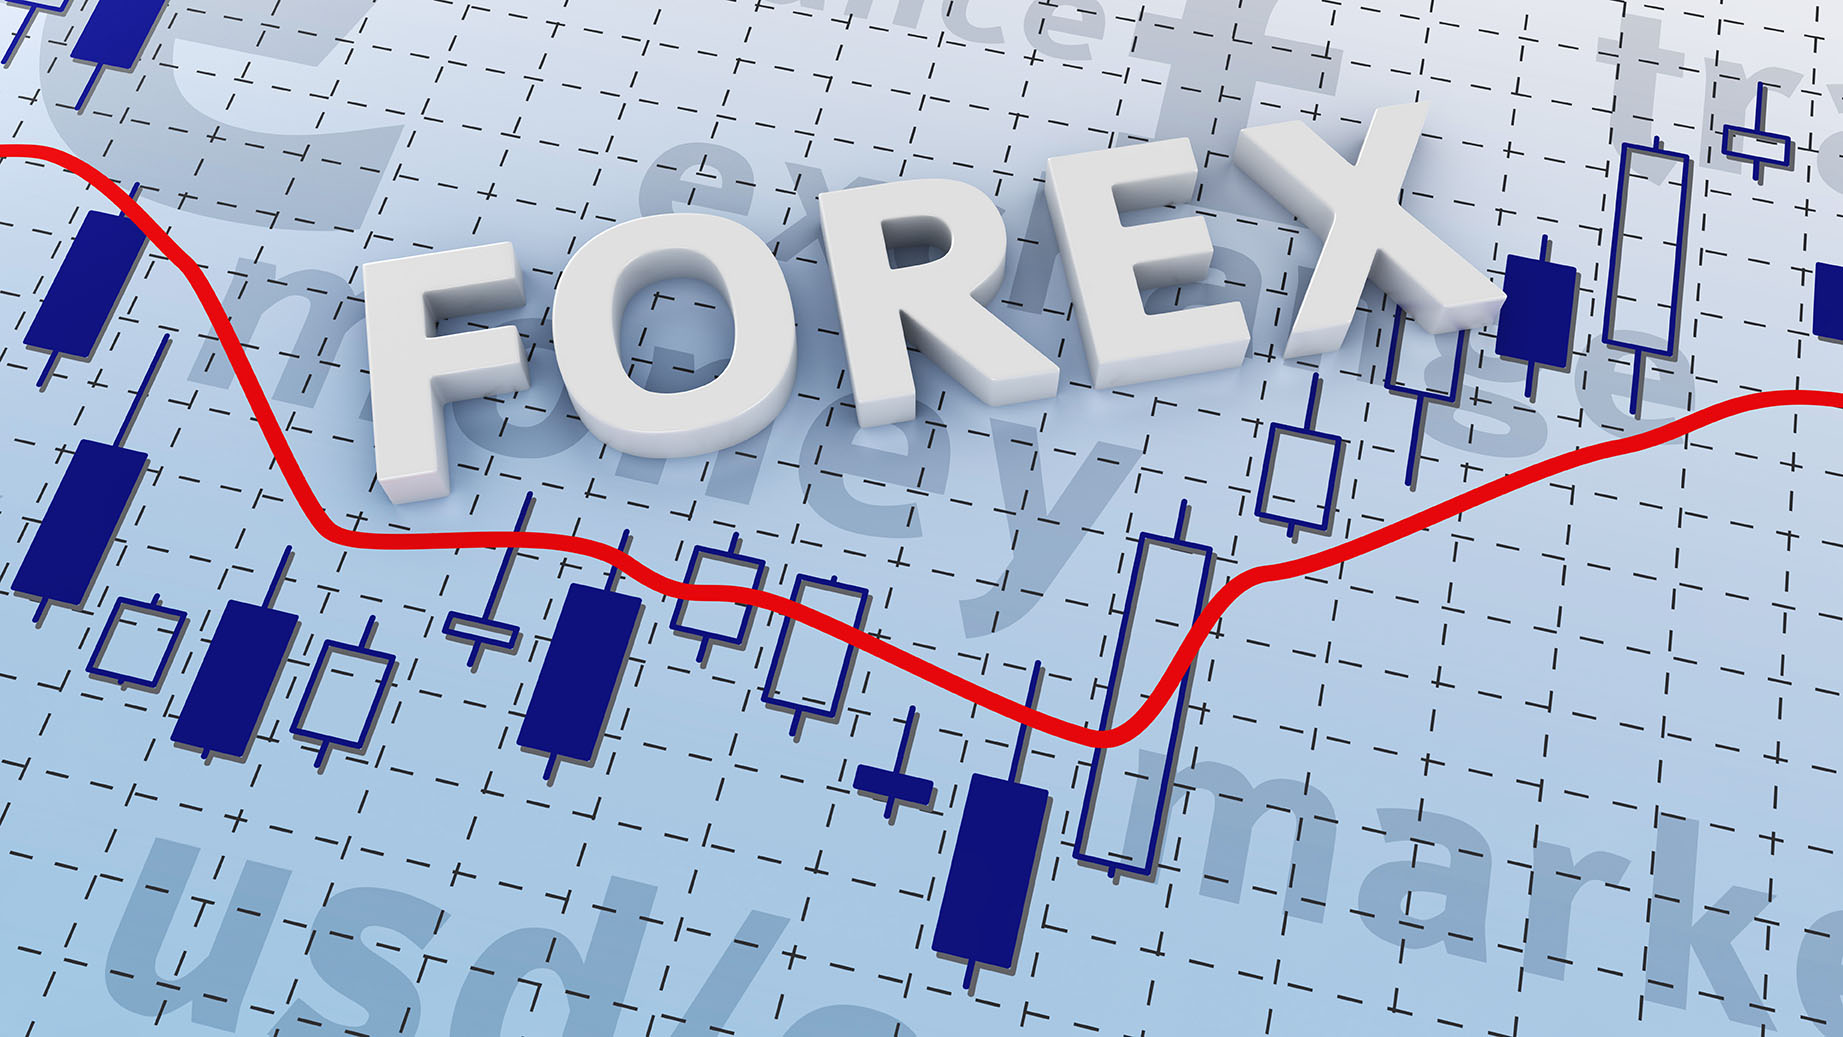 Intelligent forex investor world currency and world commodities